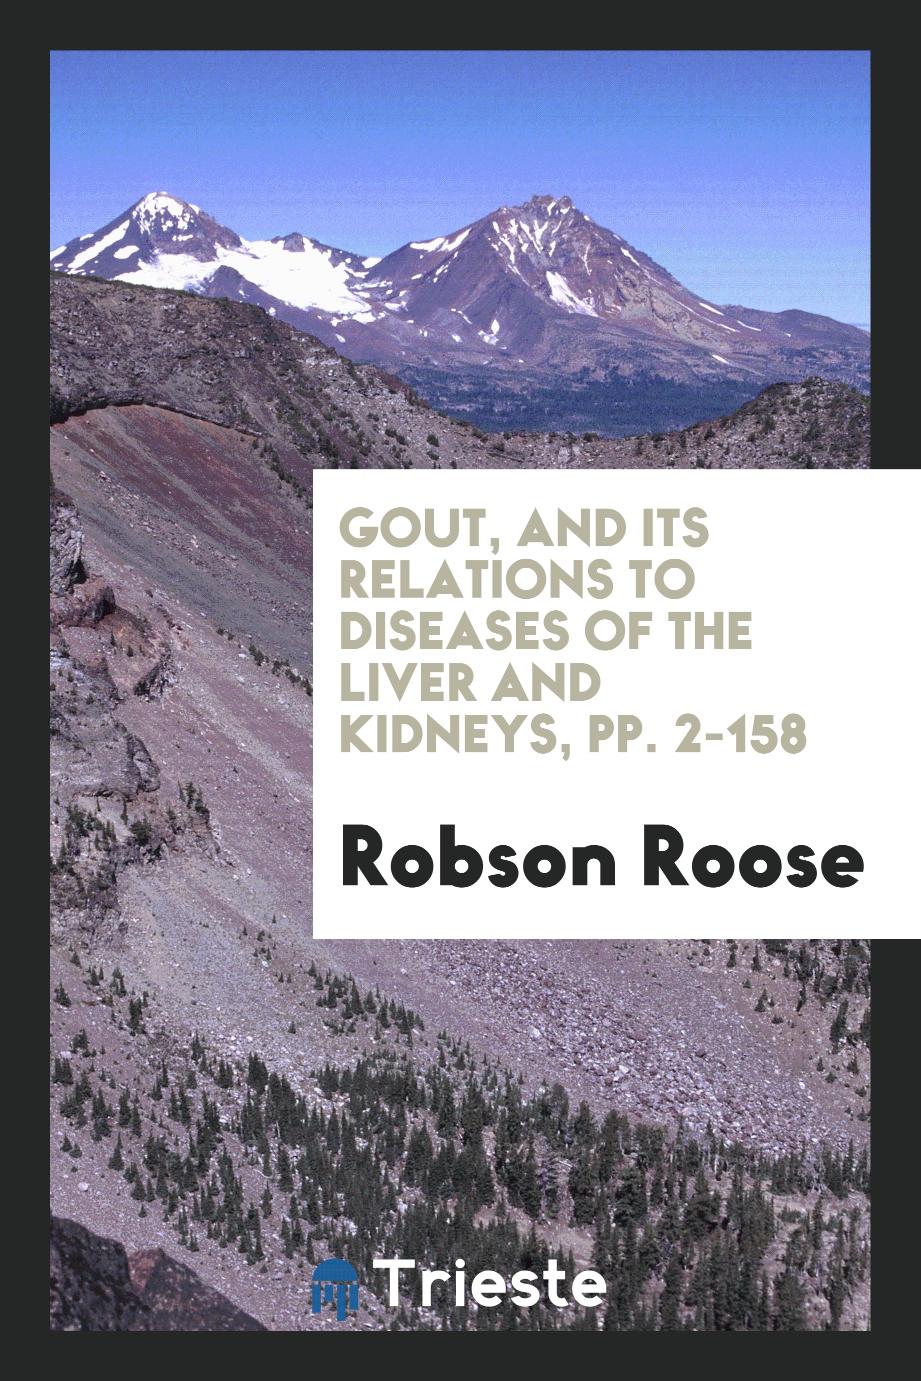 Gout, and Its Relations to Diseases of the Liver and Kidneys, pp. 2-158